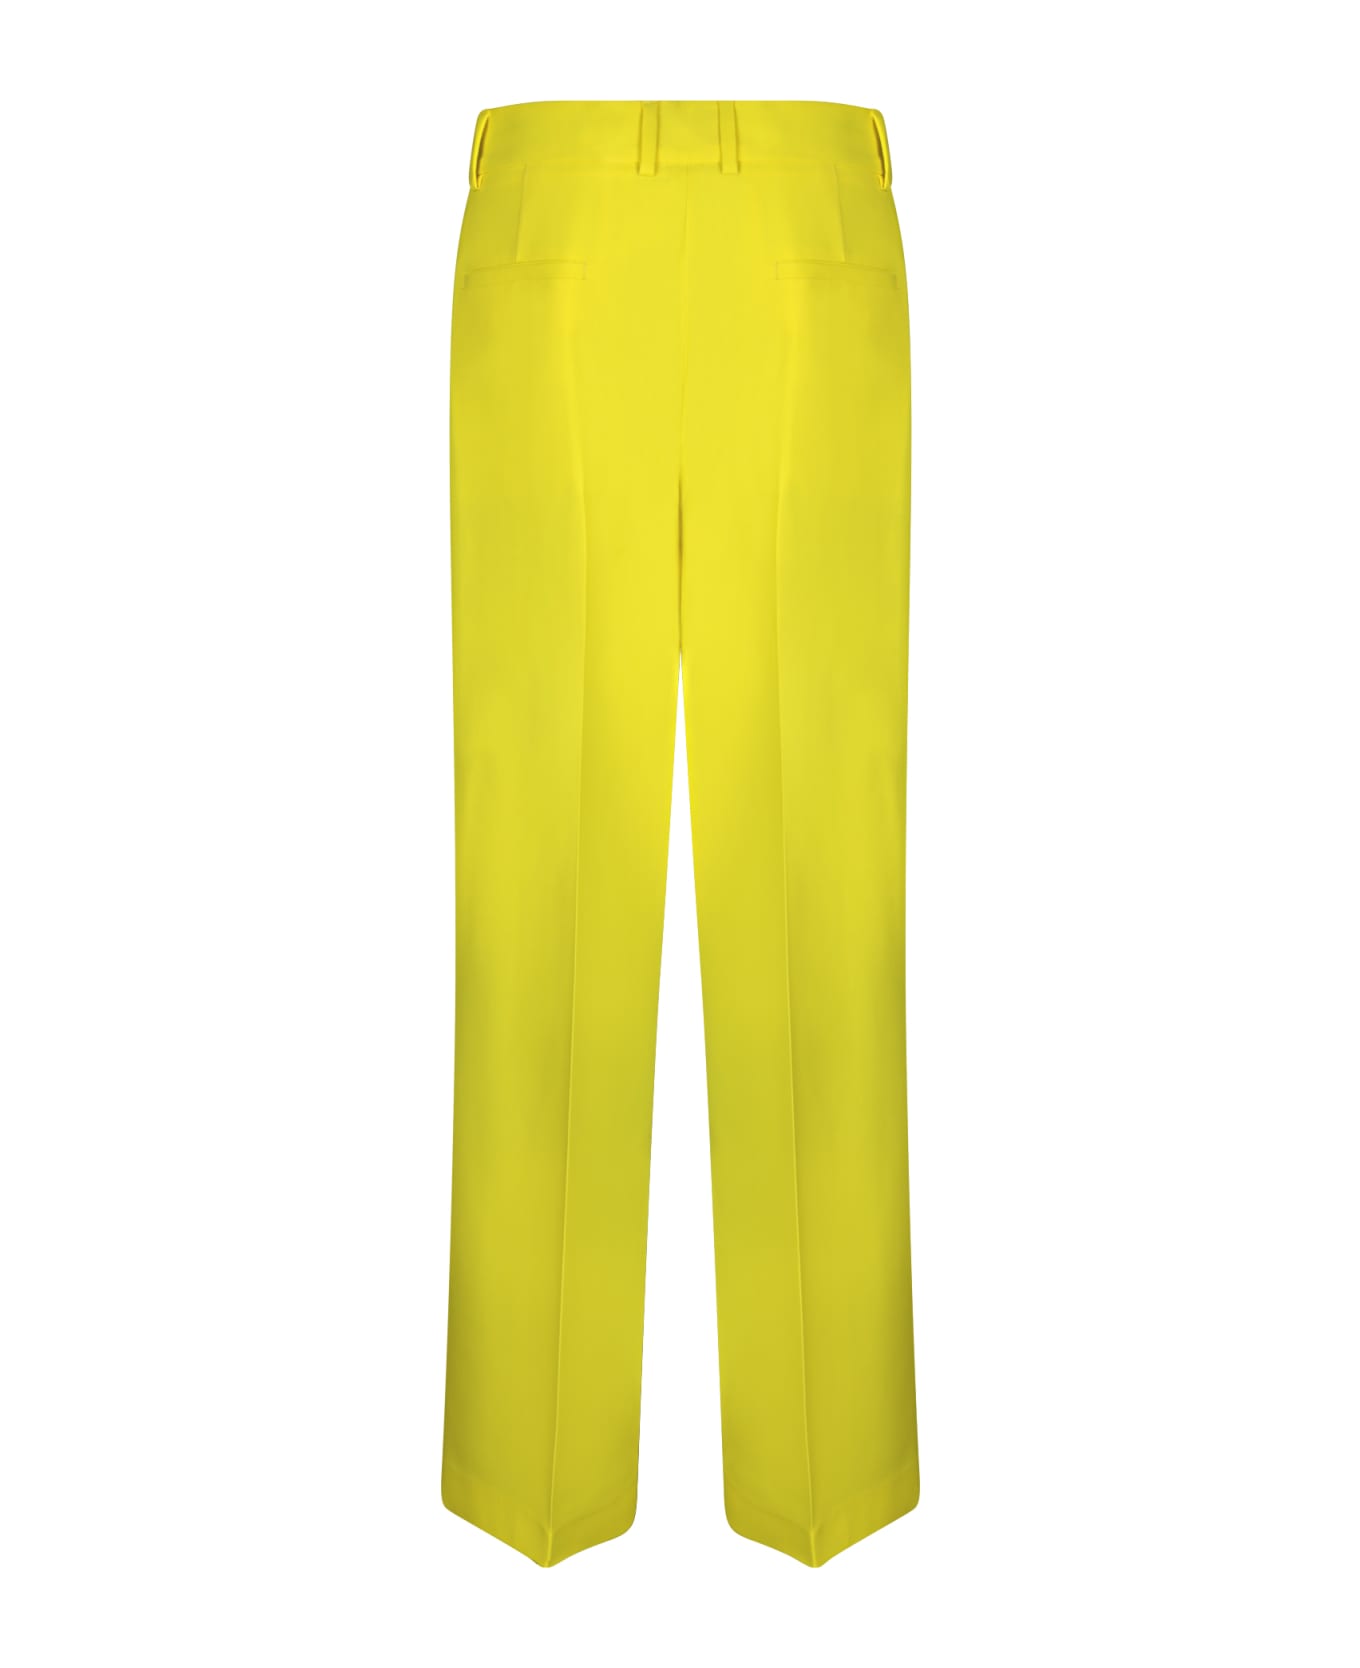 MSGM White Tailored Trousers - Yellow ボトムス